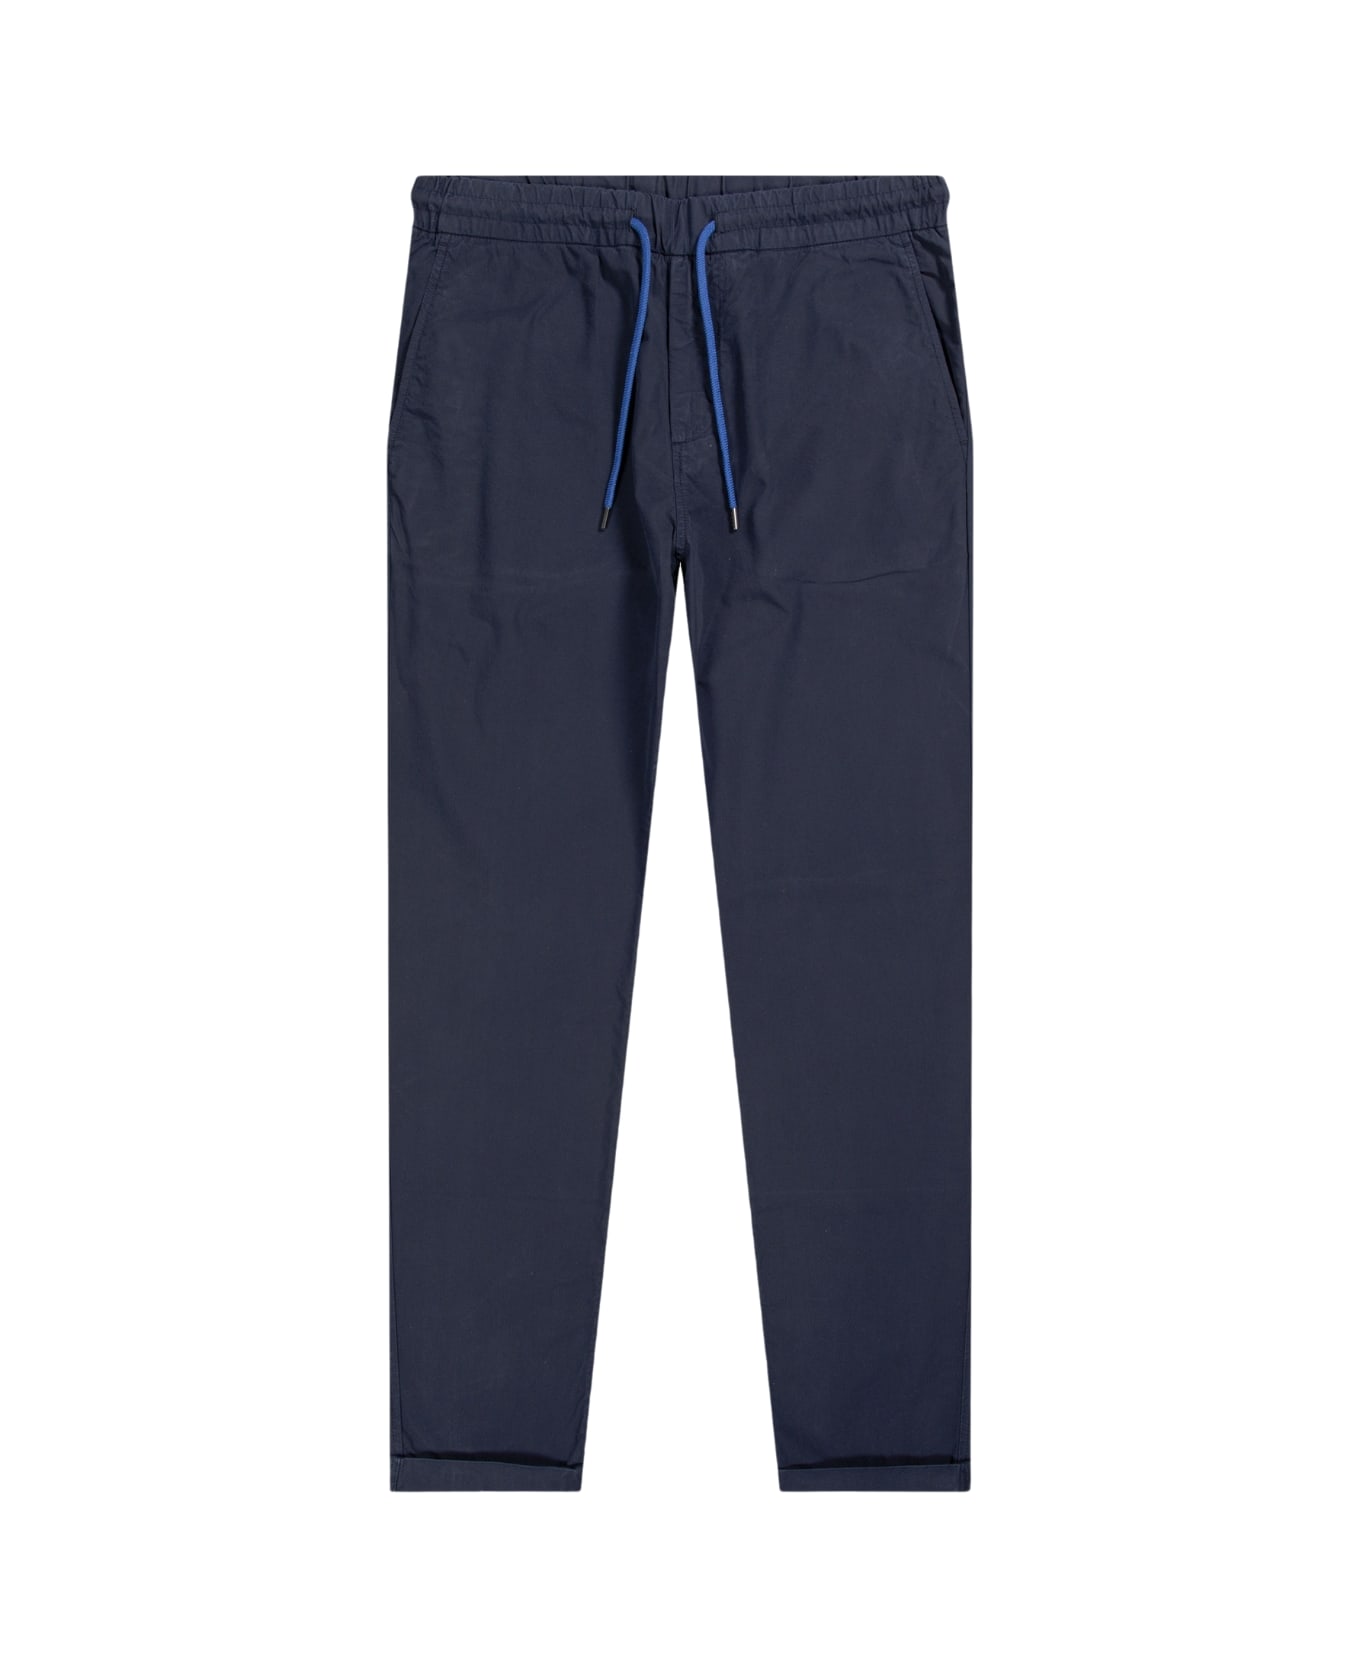 PS by Paul Smith Mens Drawstring Trouser - Blues